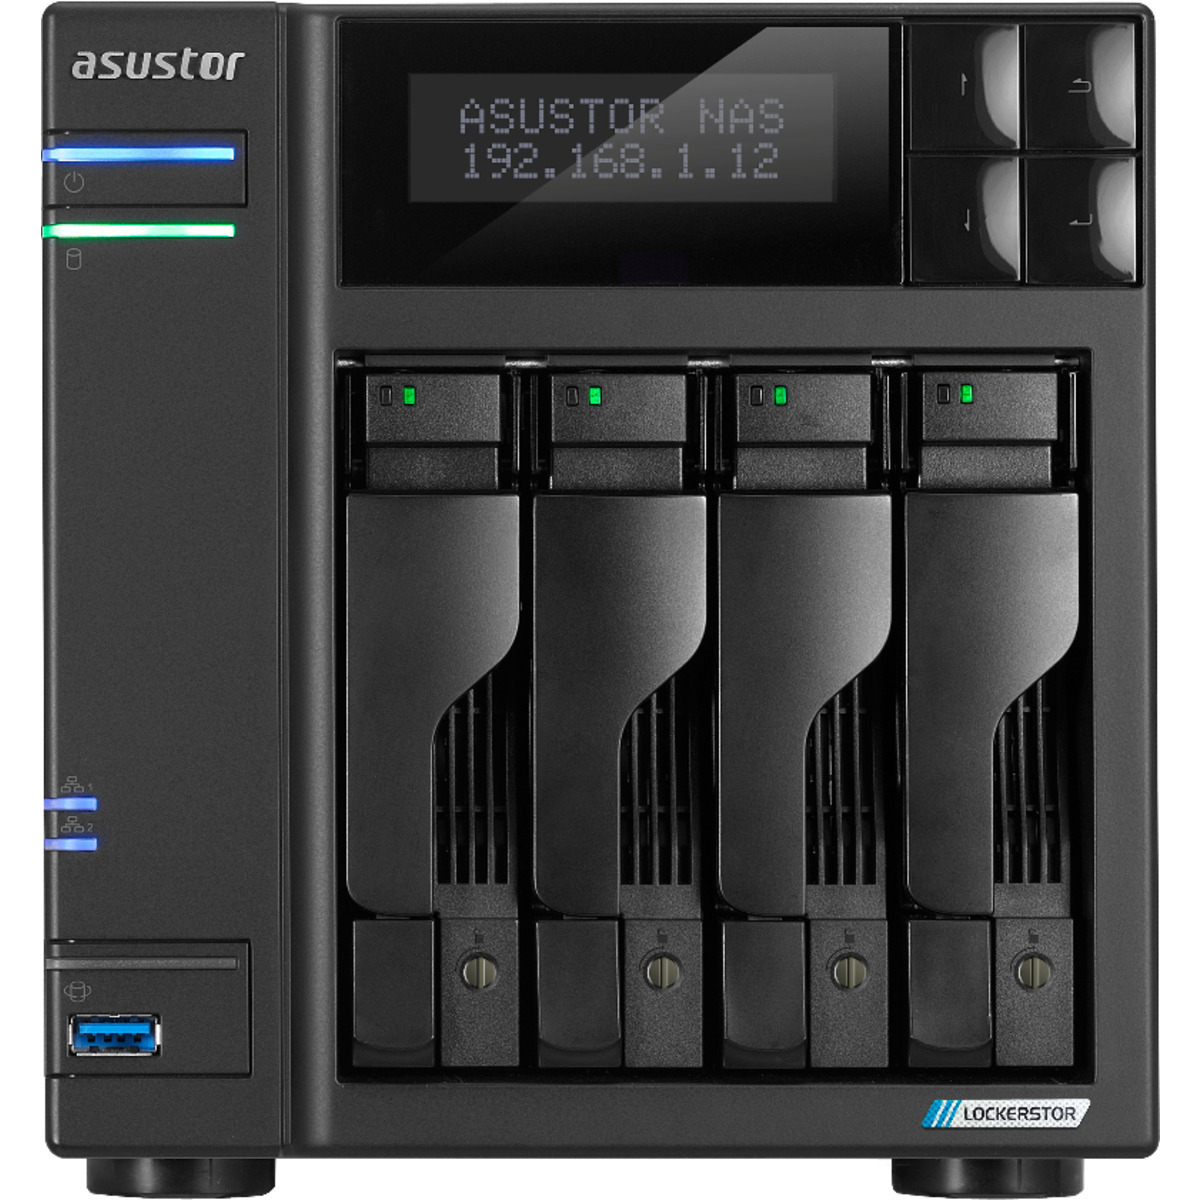 ASUSTOR LOCKERSTOR 4 Gen2 AS6704T 18tb 4-Bay Desktop Multimedia / Power User / Business NAS - Network Attached Storage Device 3x6tb Western Digital Red Plus WD60EFPX 3.5 5640rpm SATA 6Gb/s HDD NAS Class Drives Installed - Burn-In Tested - FREE RAM UPGRADE LOCKERSTOR 4 Gen2 AS6704T